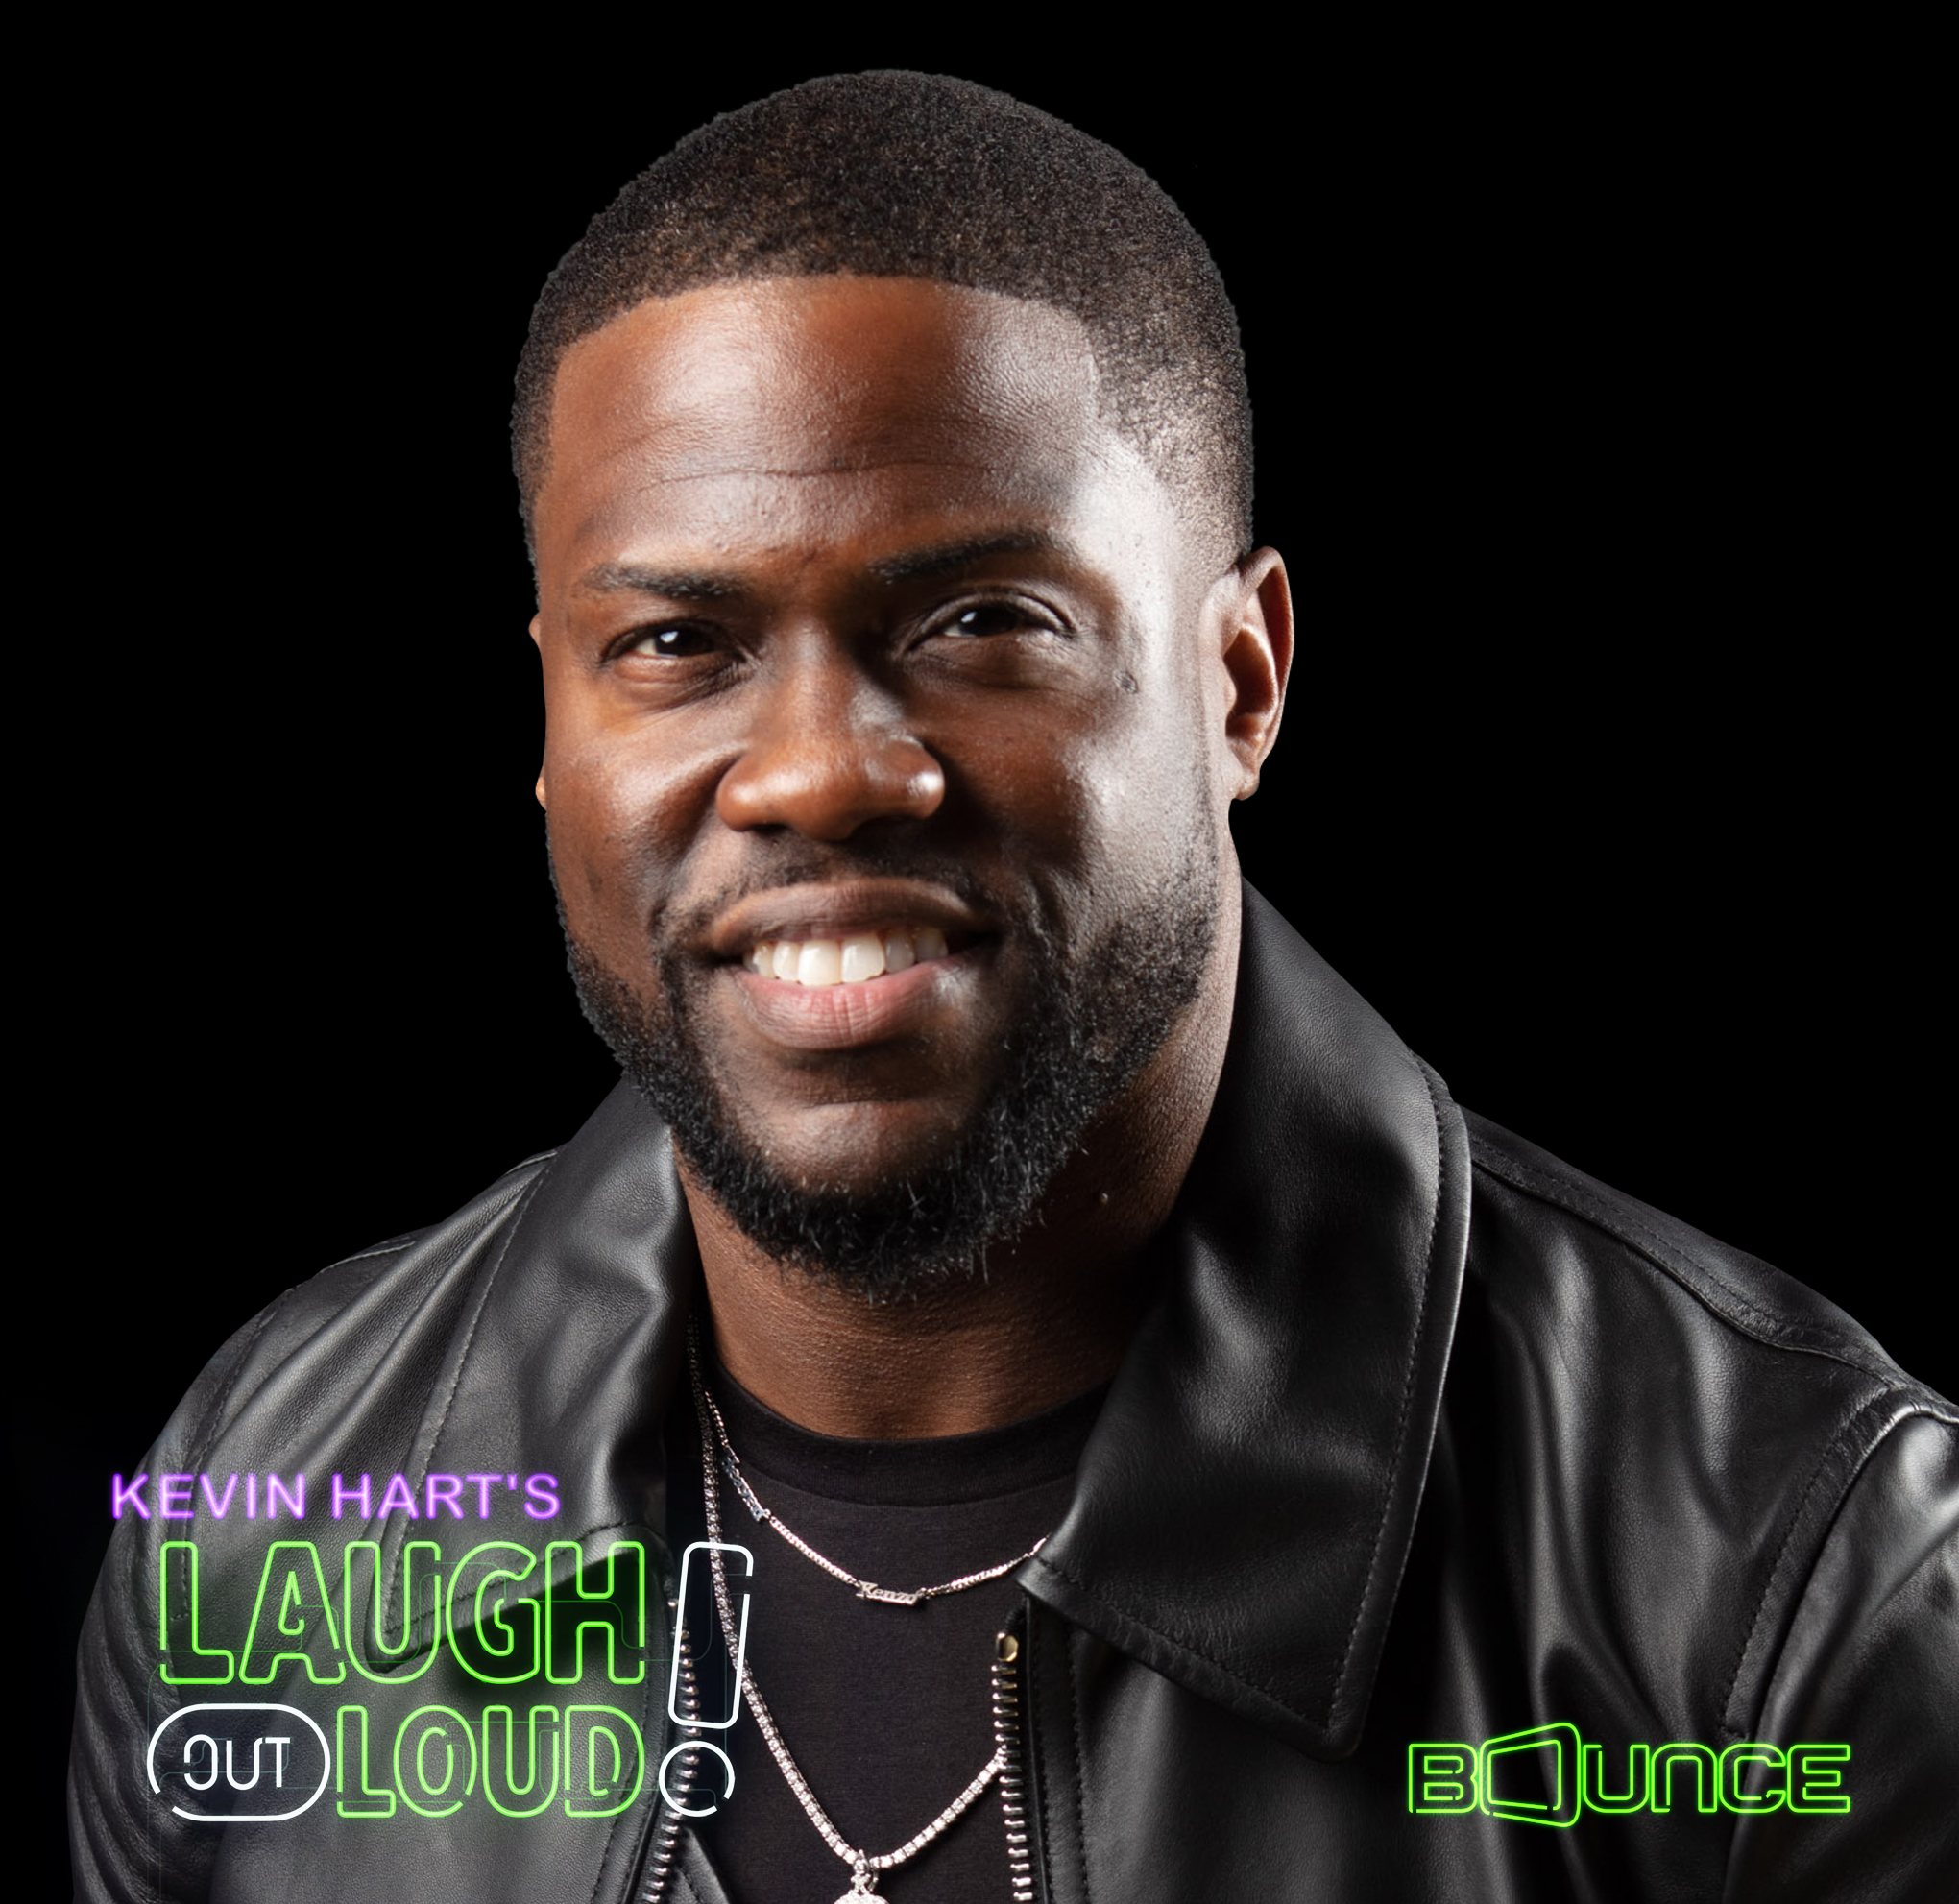 Kevin Hart S Laugh Out Loud New Comedy Series Coming To Bounce Canceled Renewed Tv Shows